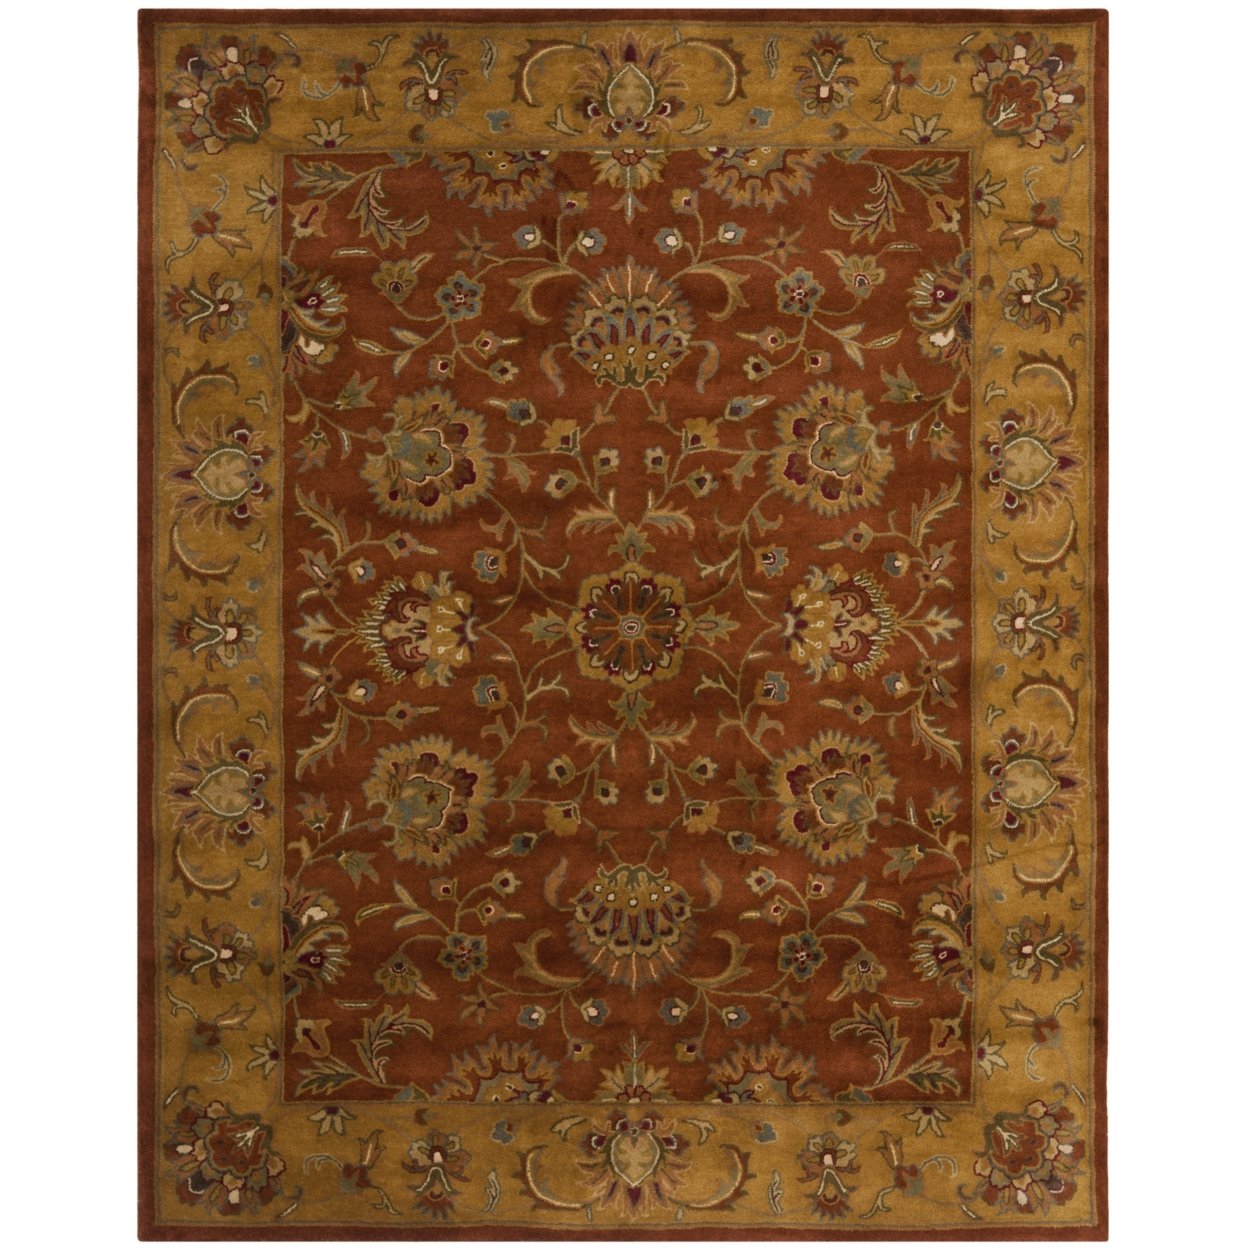 SAFAVIEH HG820A Heritage Red / Natural - 2' 3 X 12'